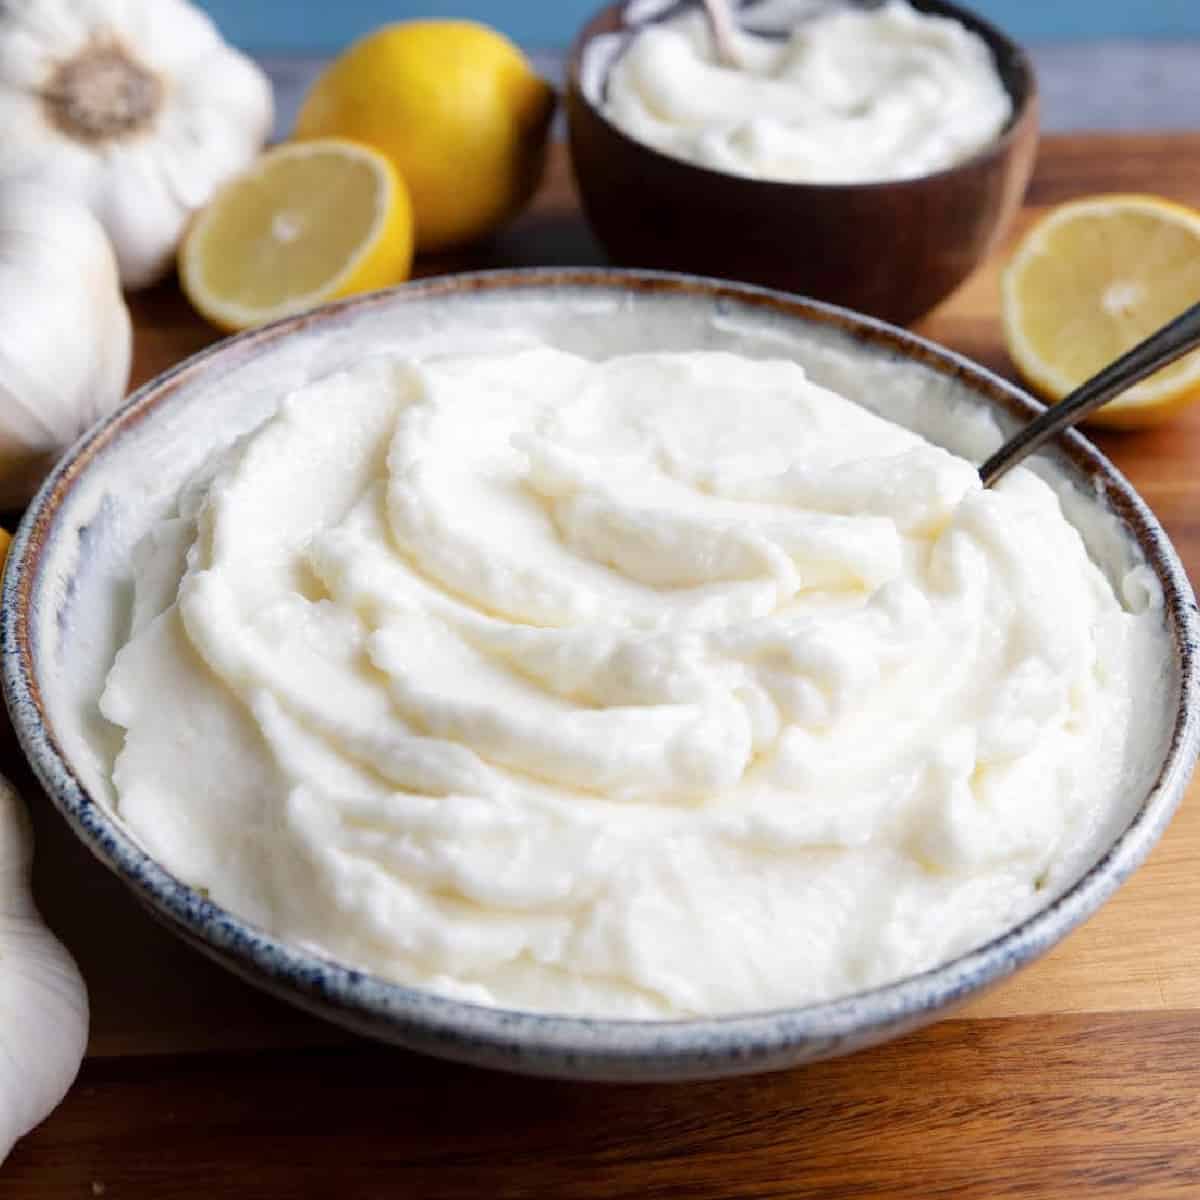 Lebanese garlic sauce, also known as toum, is a rich and creamy sauce made with only four ingredients. It's dairy-free, vegan and ready in no time!
